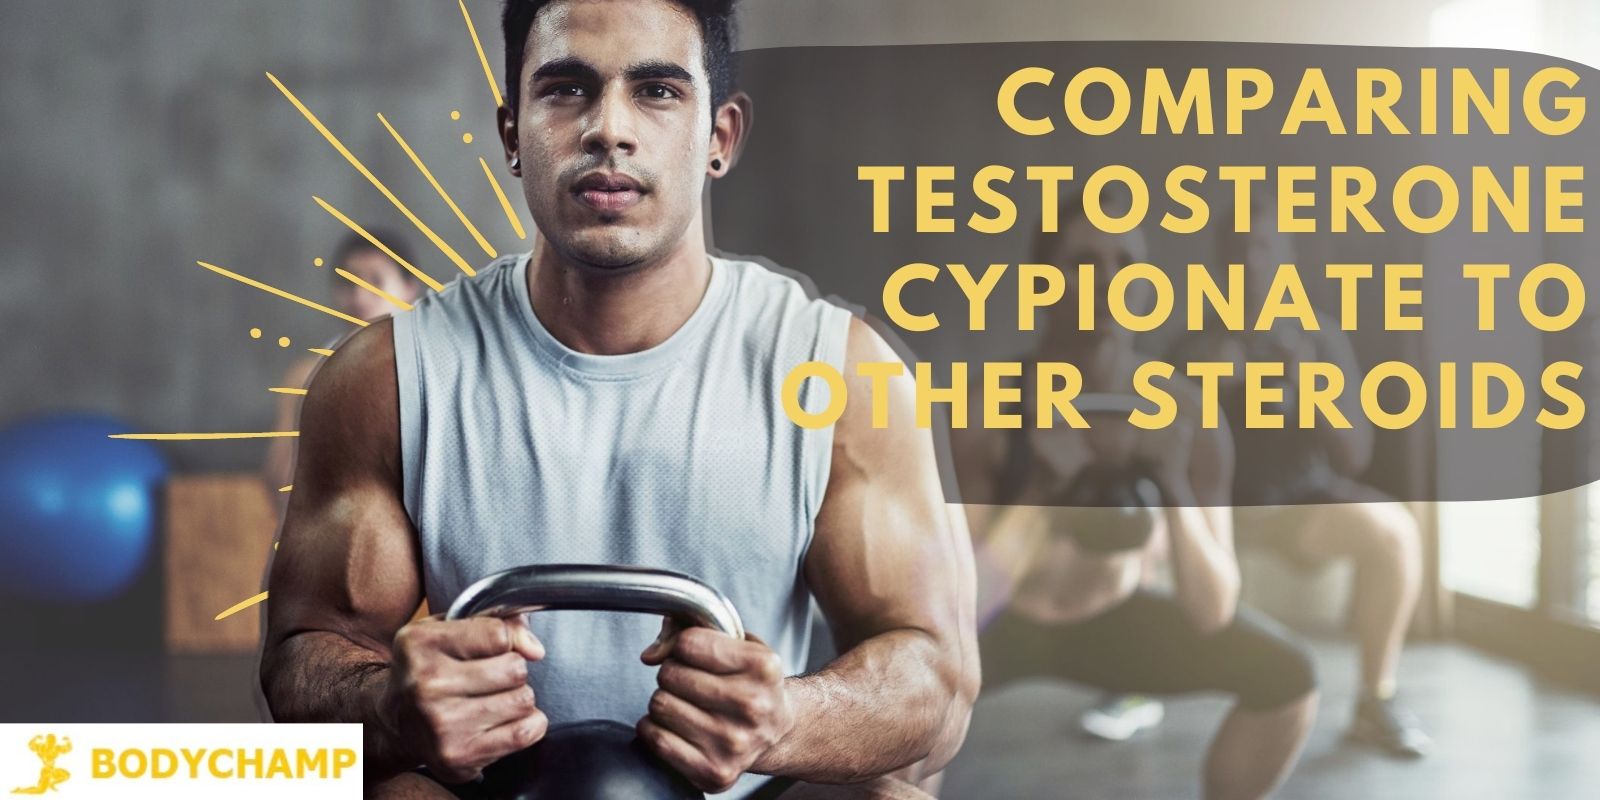 Comparing Testosterone Cypionate to Other Steroids